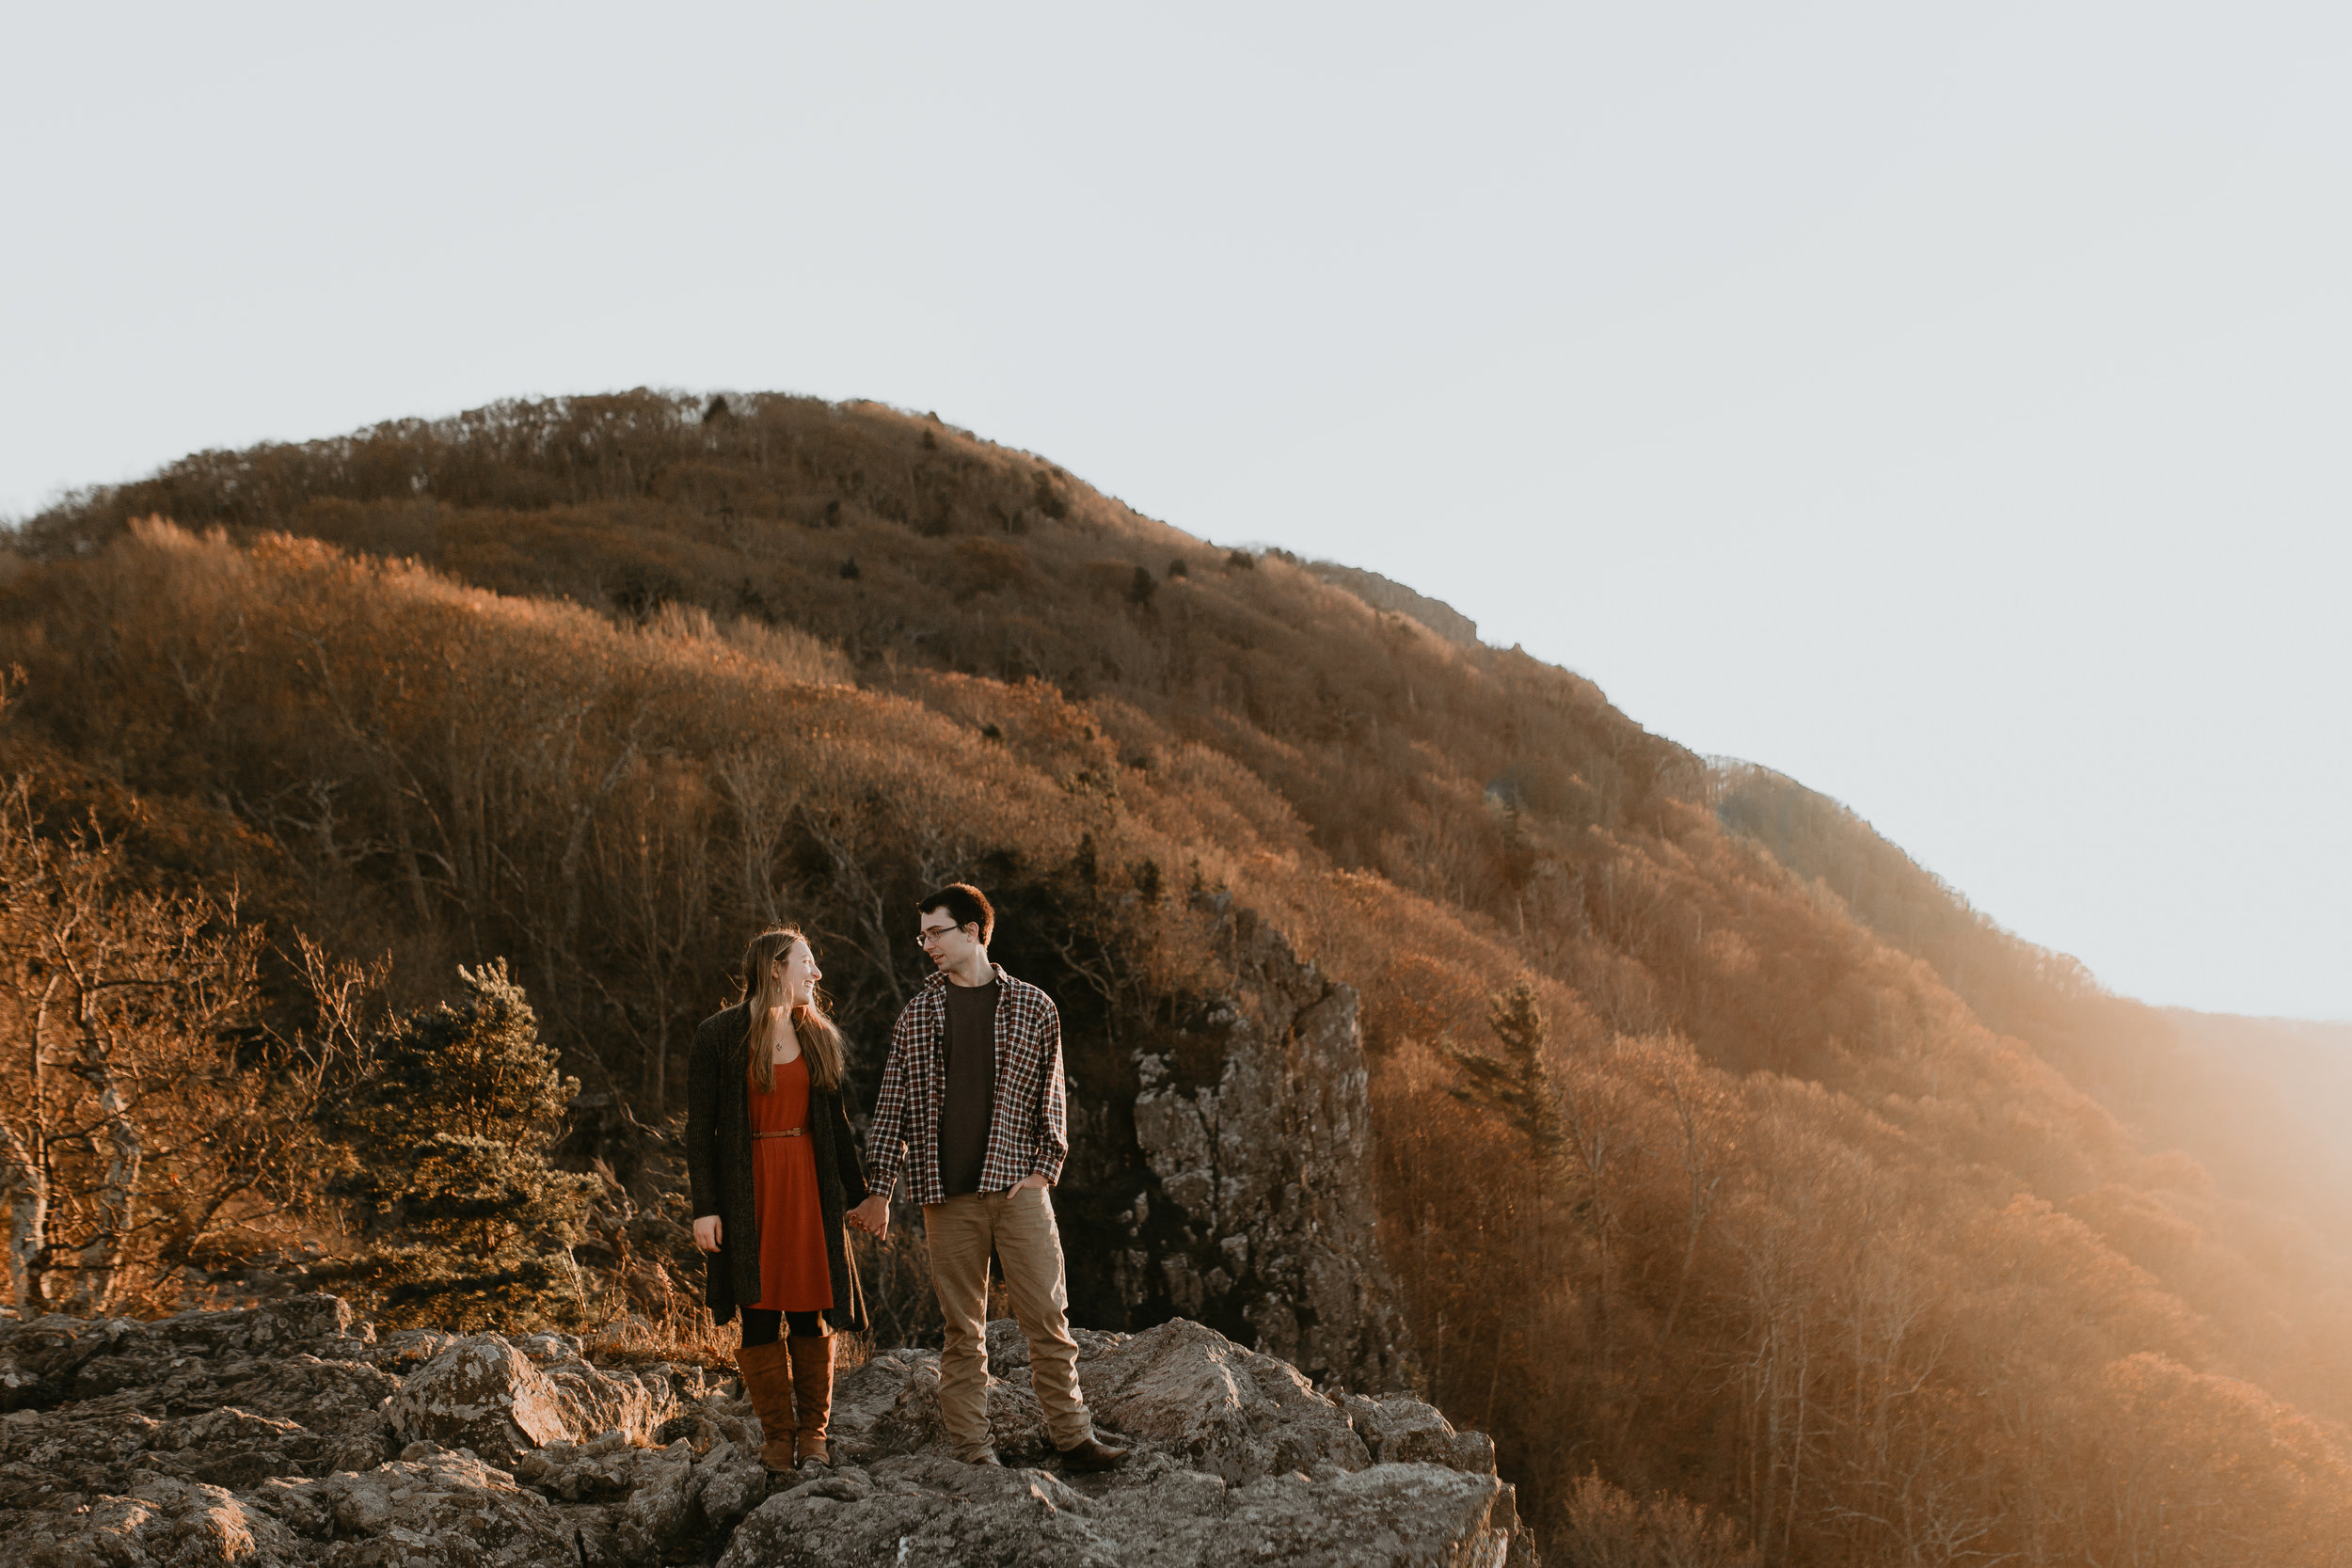 nicole-daacke-photography-shenandoah-national-park-adventure-engagement-session-with-fall-foliage-shenandoah-elopement-photographer-engagement-photos-in-virginia-charlottesville-national-park-adventure-elopement-photographer-3912.jpg